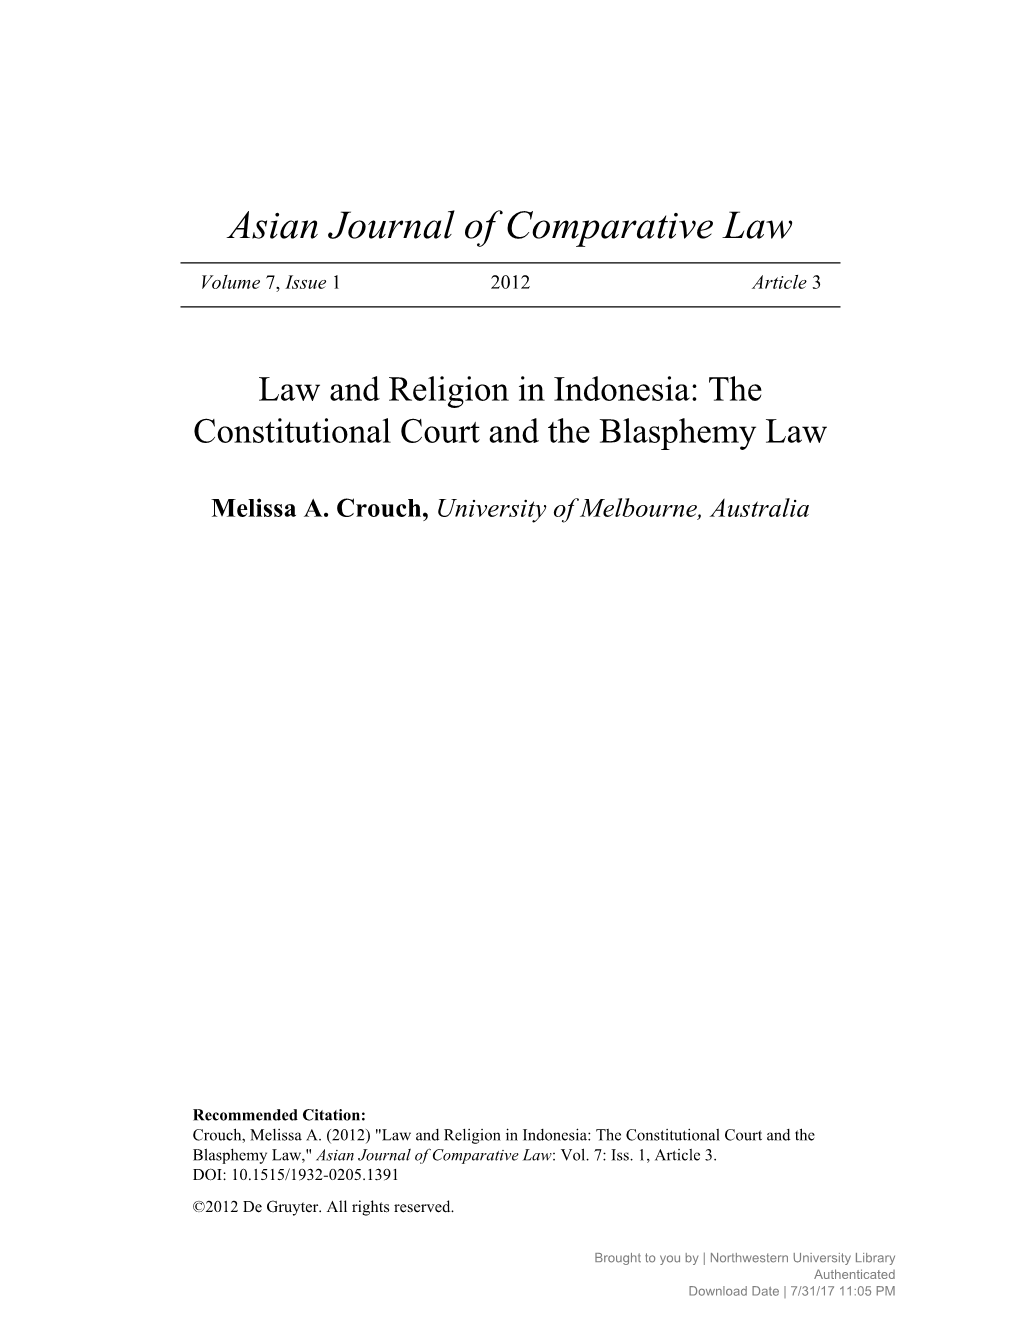 Law and Religion in Indonesia: the Constitutional Court and the Blasphemy Law